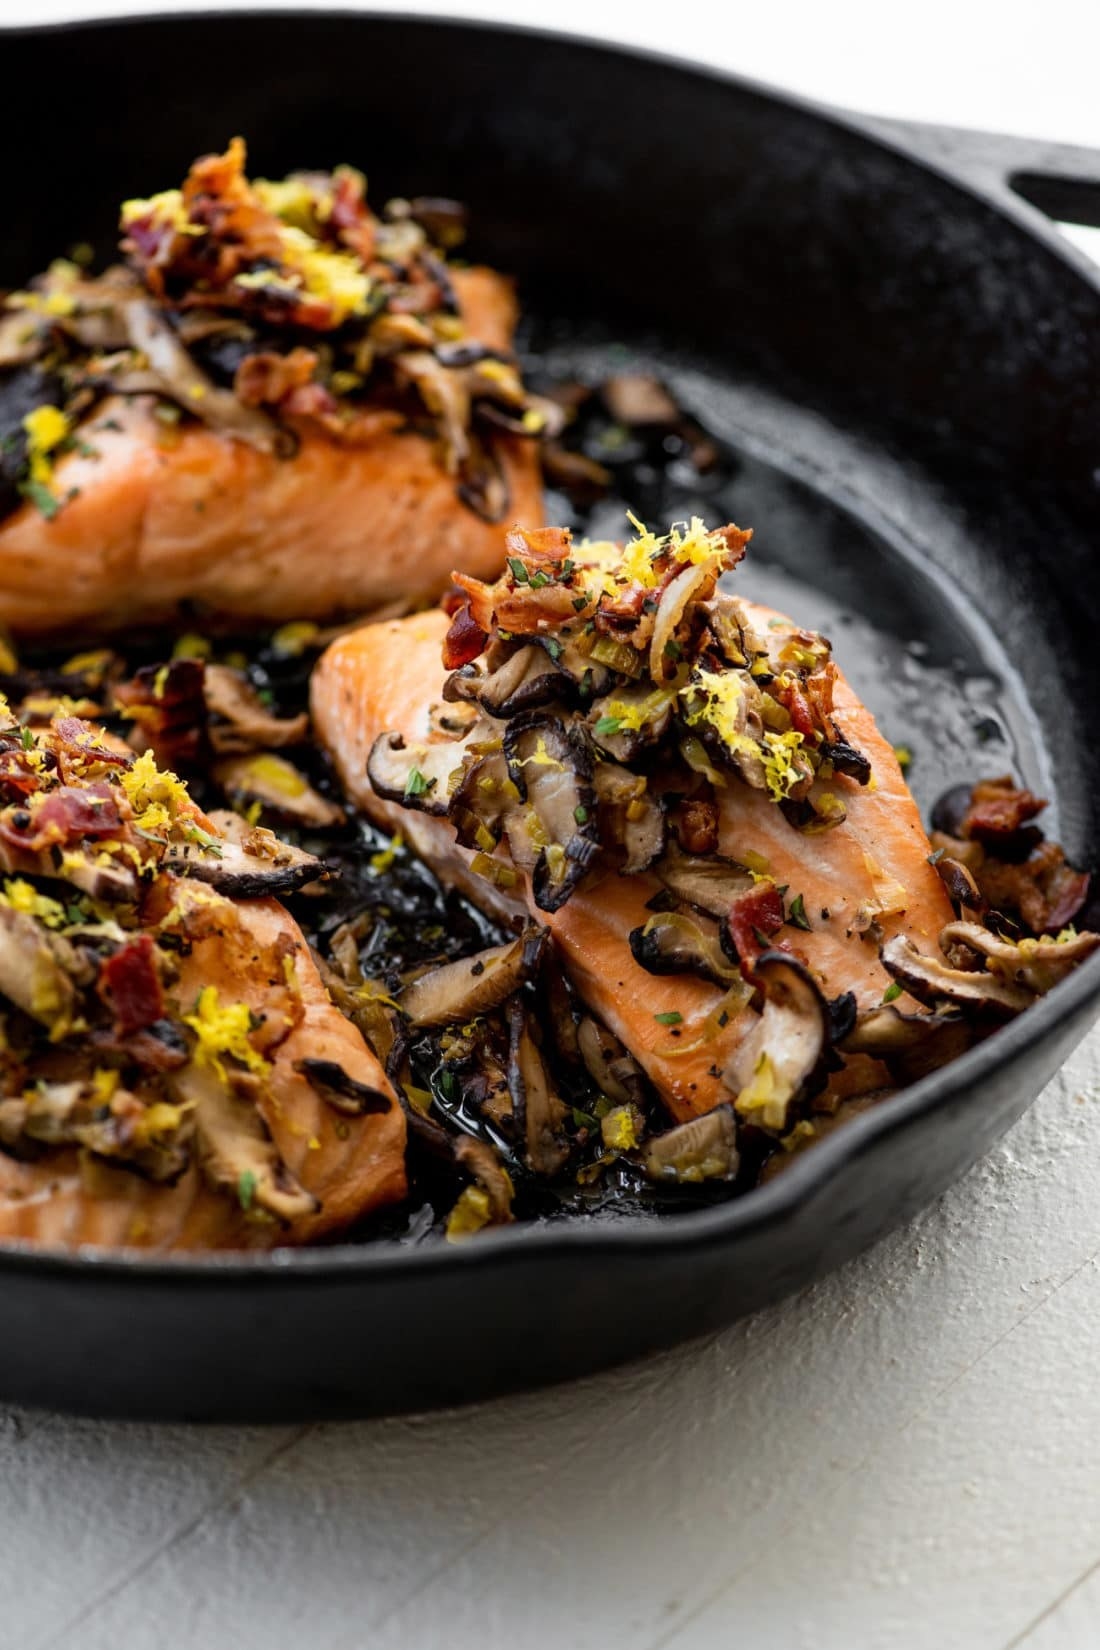 Salmon with leeks and mushrooms in a skillet.